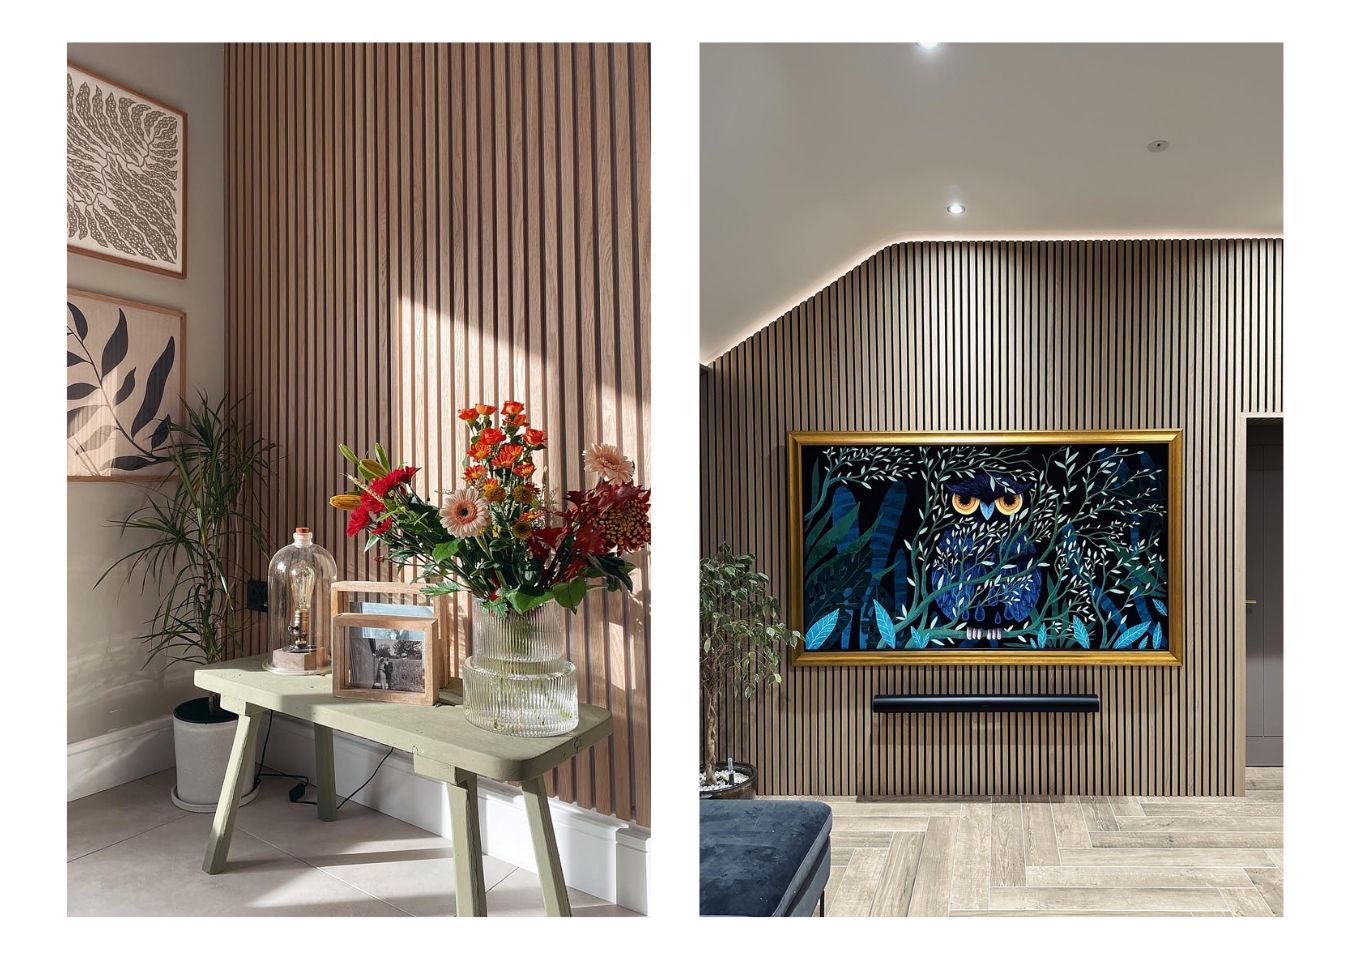 Wholesale Custom Mural Wallpaper 3D Stereoscopic Abstract Art Large Wall  Painting Living Room Bedroom TV Background Nonwoven Wallpaper From  malibabacom